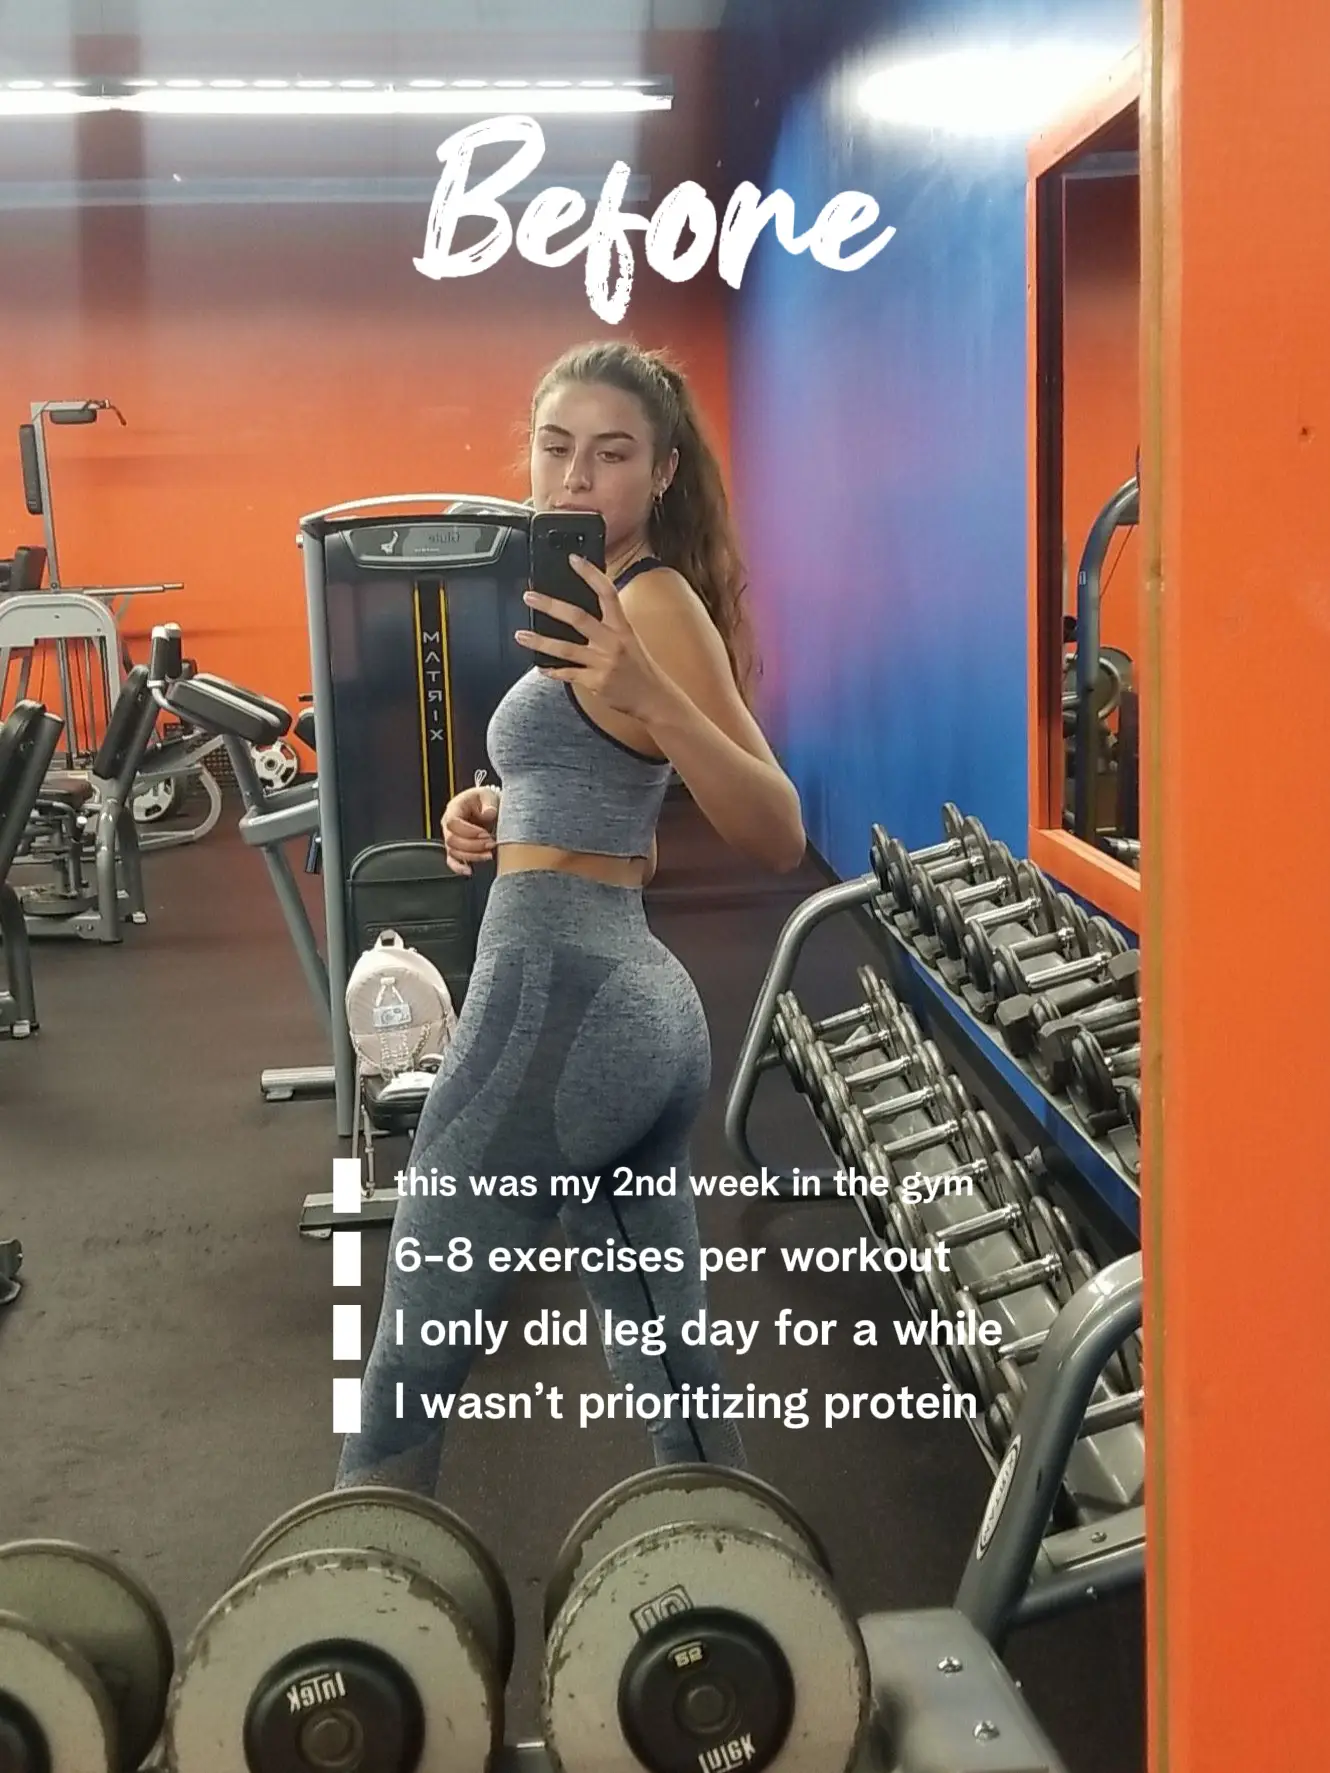 BOOM BOOTY for my lovelies 🔥🍑 With or without dumbbells you can do these  exercises to grow and shape your booty. This is NOT HIIT